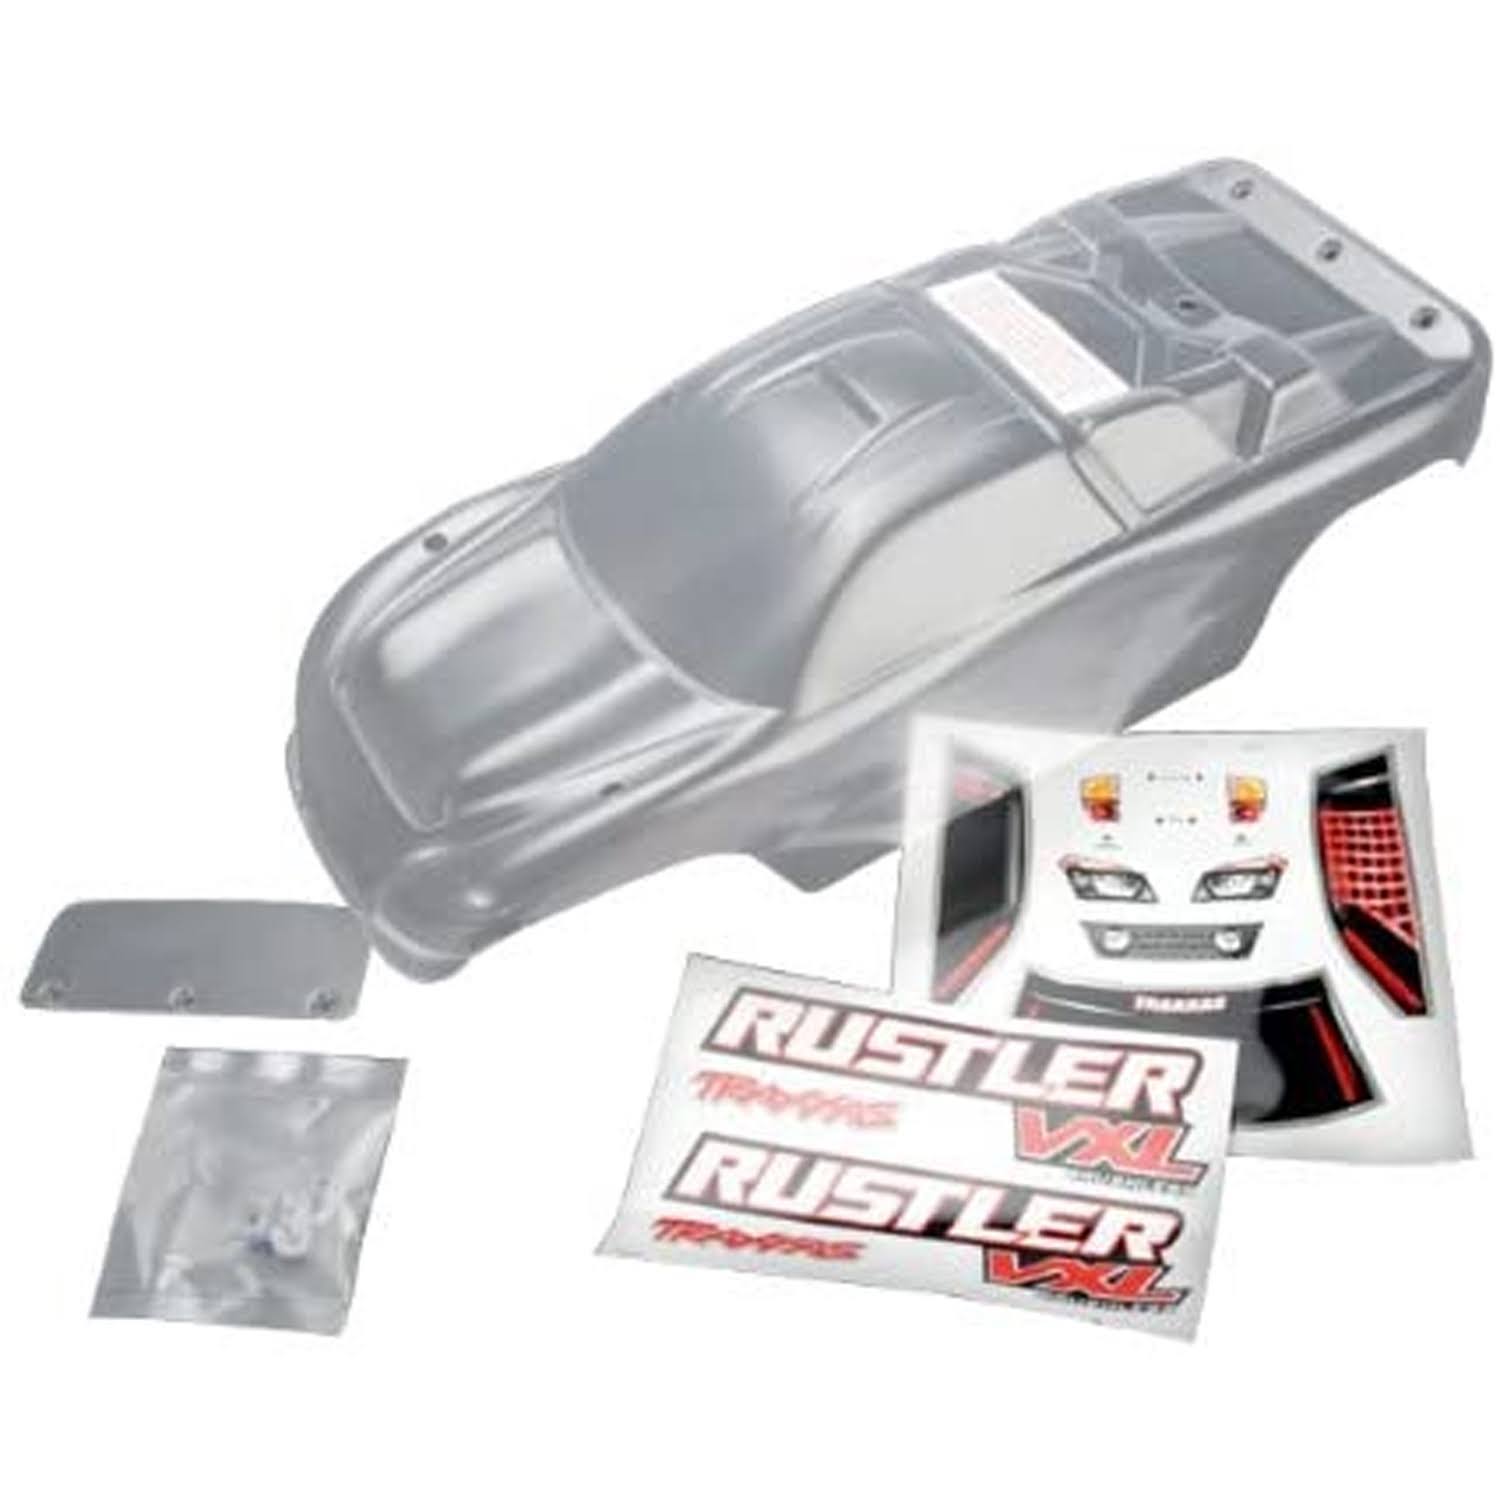 Traxxas Rustler Clear Body with Decals Wing and Hardware